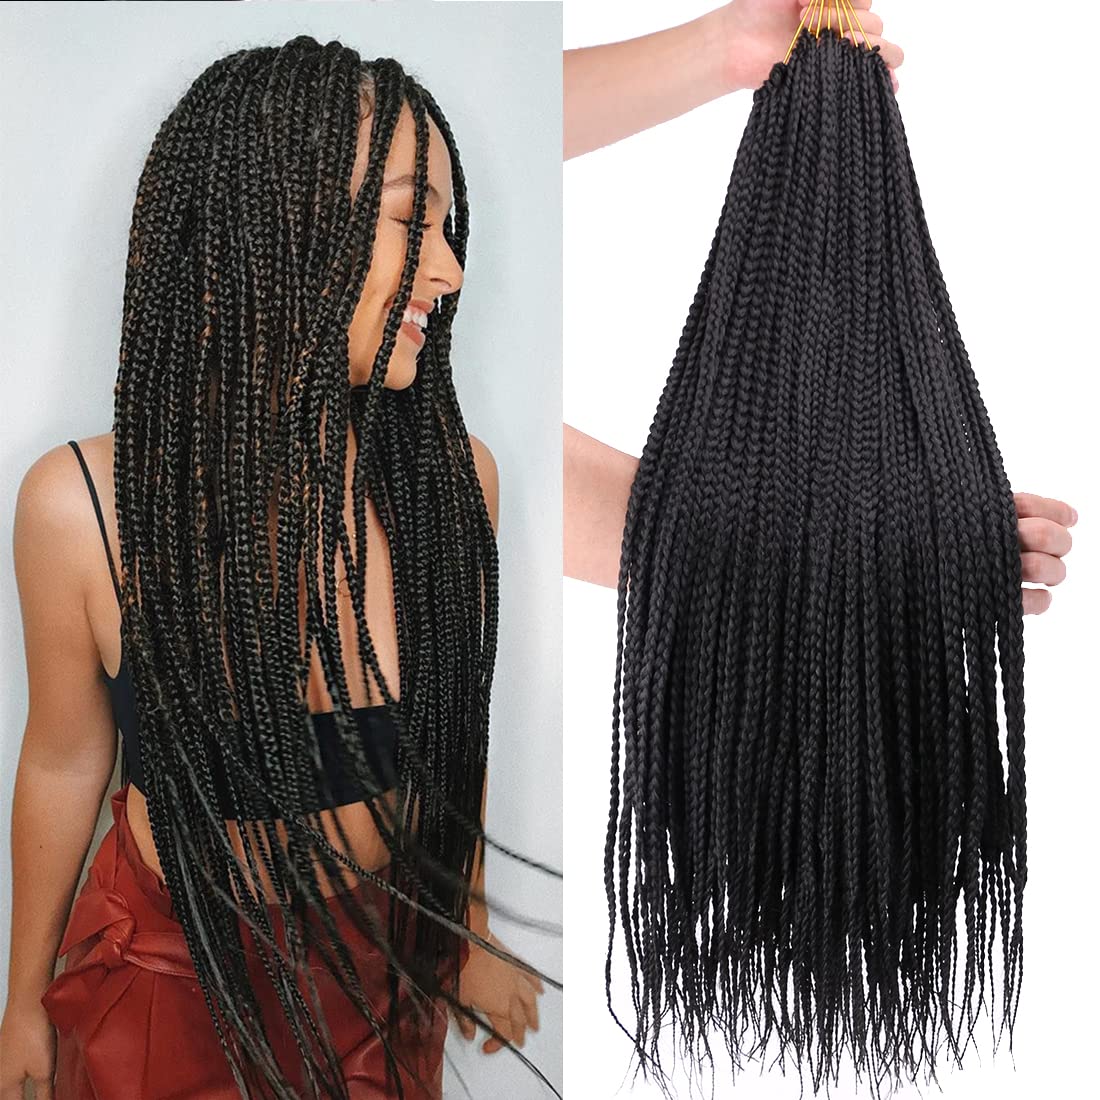  Box Braids Crochet Hair 6 Packs Extensions Synthetic Hair  Crochet Braids Braiding Hair 24 Strands/pack (18 Inch, T1B/30) : Beauty &  Personal Care